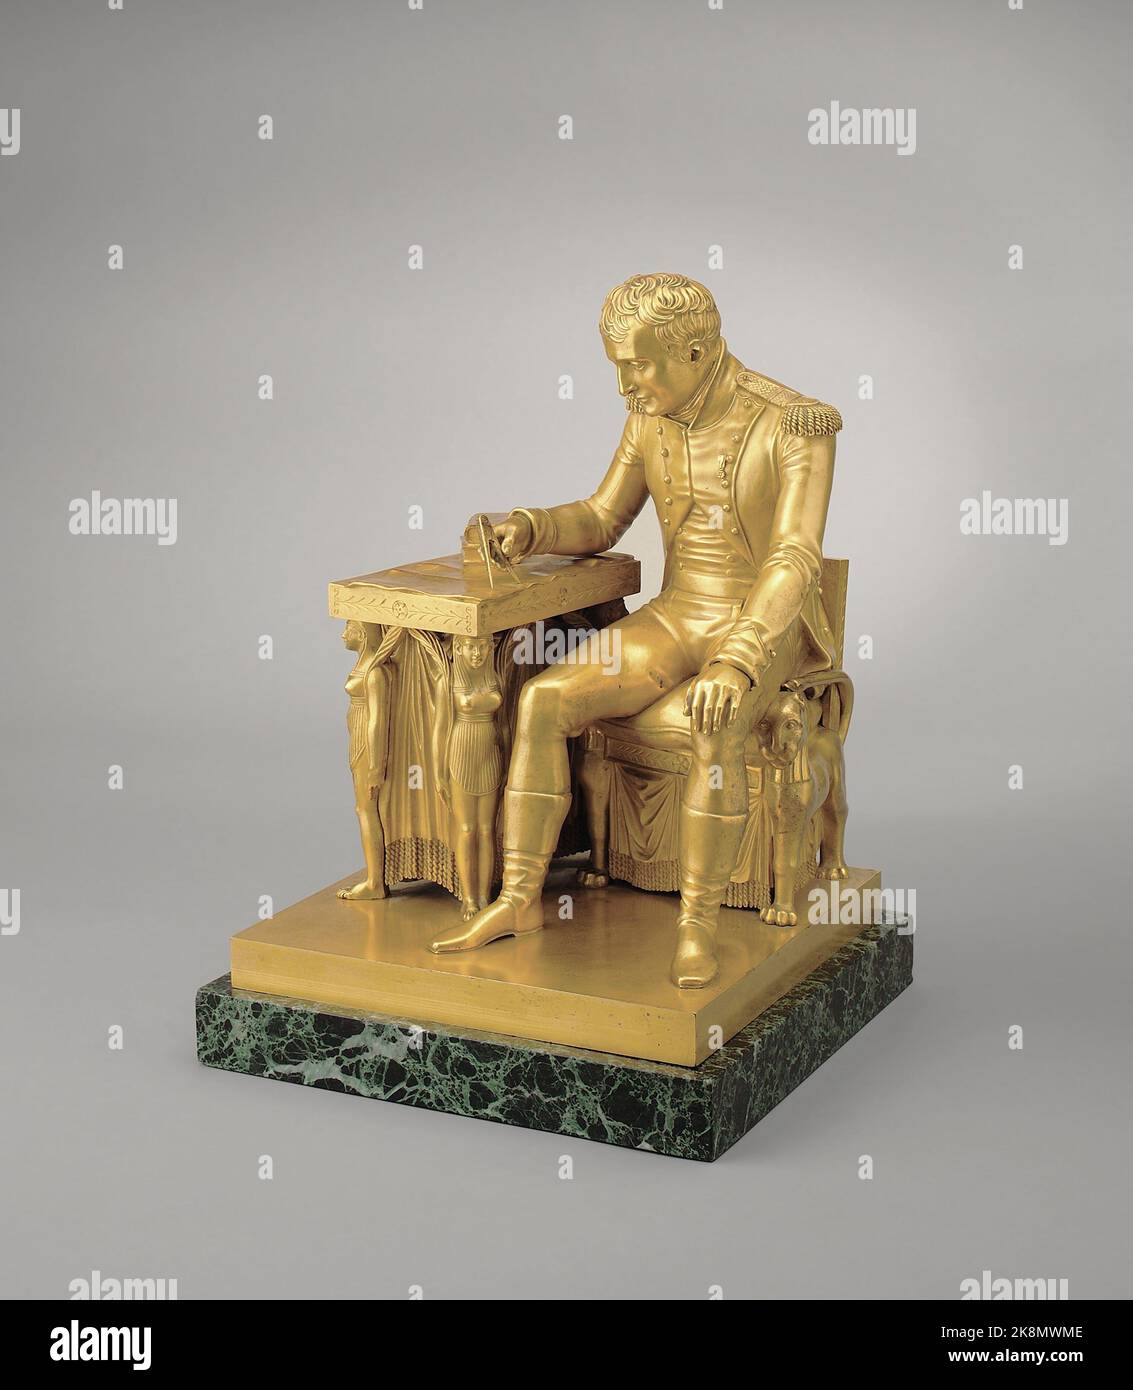 Antoine Mouton, known as Moutoni (born in 1765) French school Napoleon I studying a map of Europe Chiselled bronze painted gold with green marble base (H. 46.5 cm x L. 33 cm x D. 33 cm) Statuette created by Vivant Denon commissioned by Napoleon for his workroom in the Tuileries Palace.  Alberto Ricci Photo Stock Photo